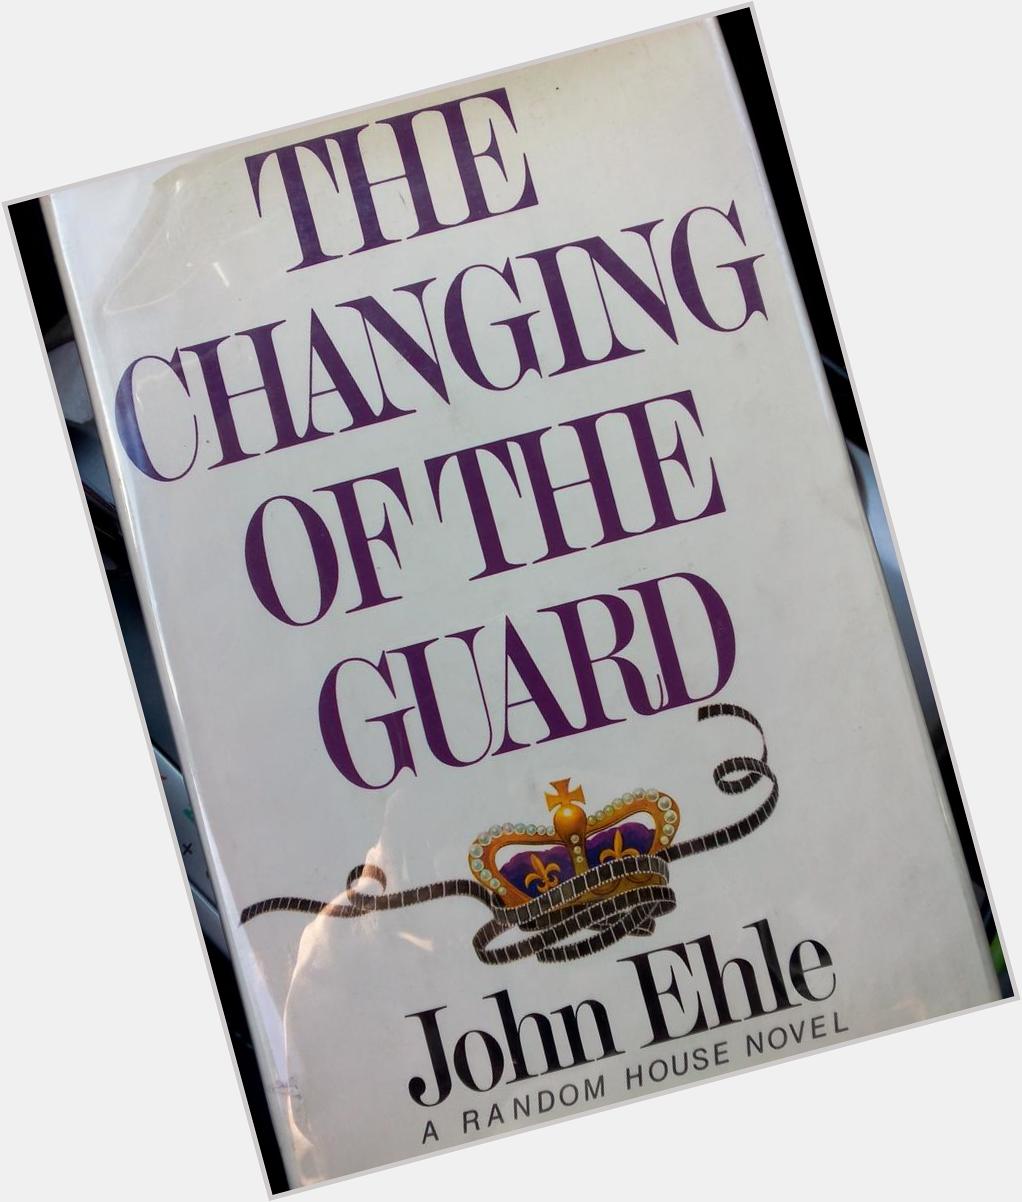 First edition! Happy birthday to the author, John Ehle. (cc: 